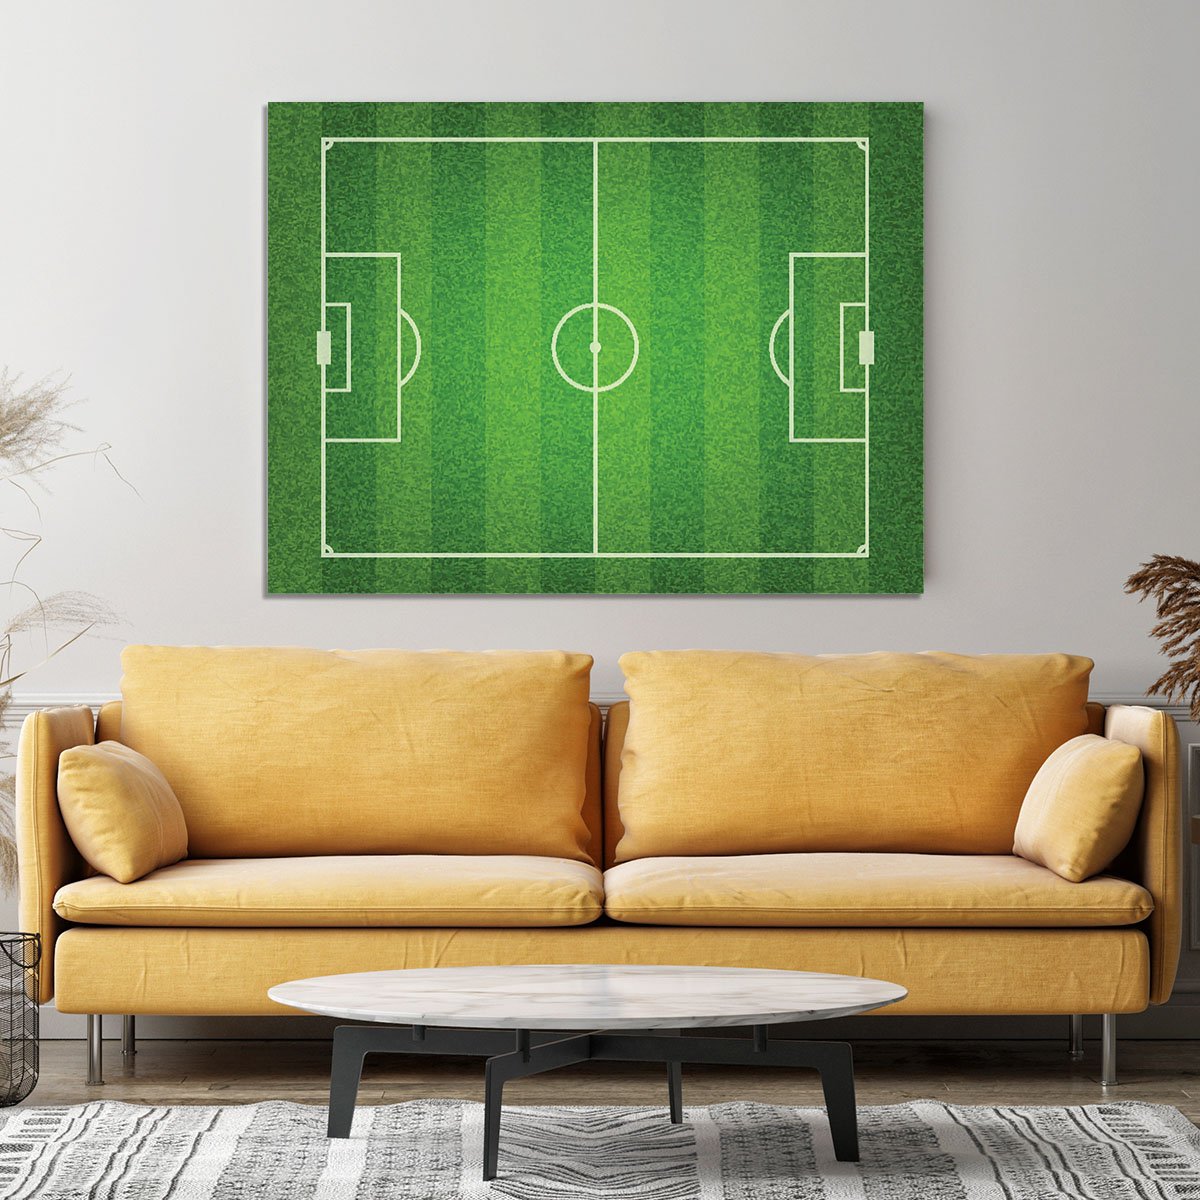 Green grass soccer field Canvas Print or Poster